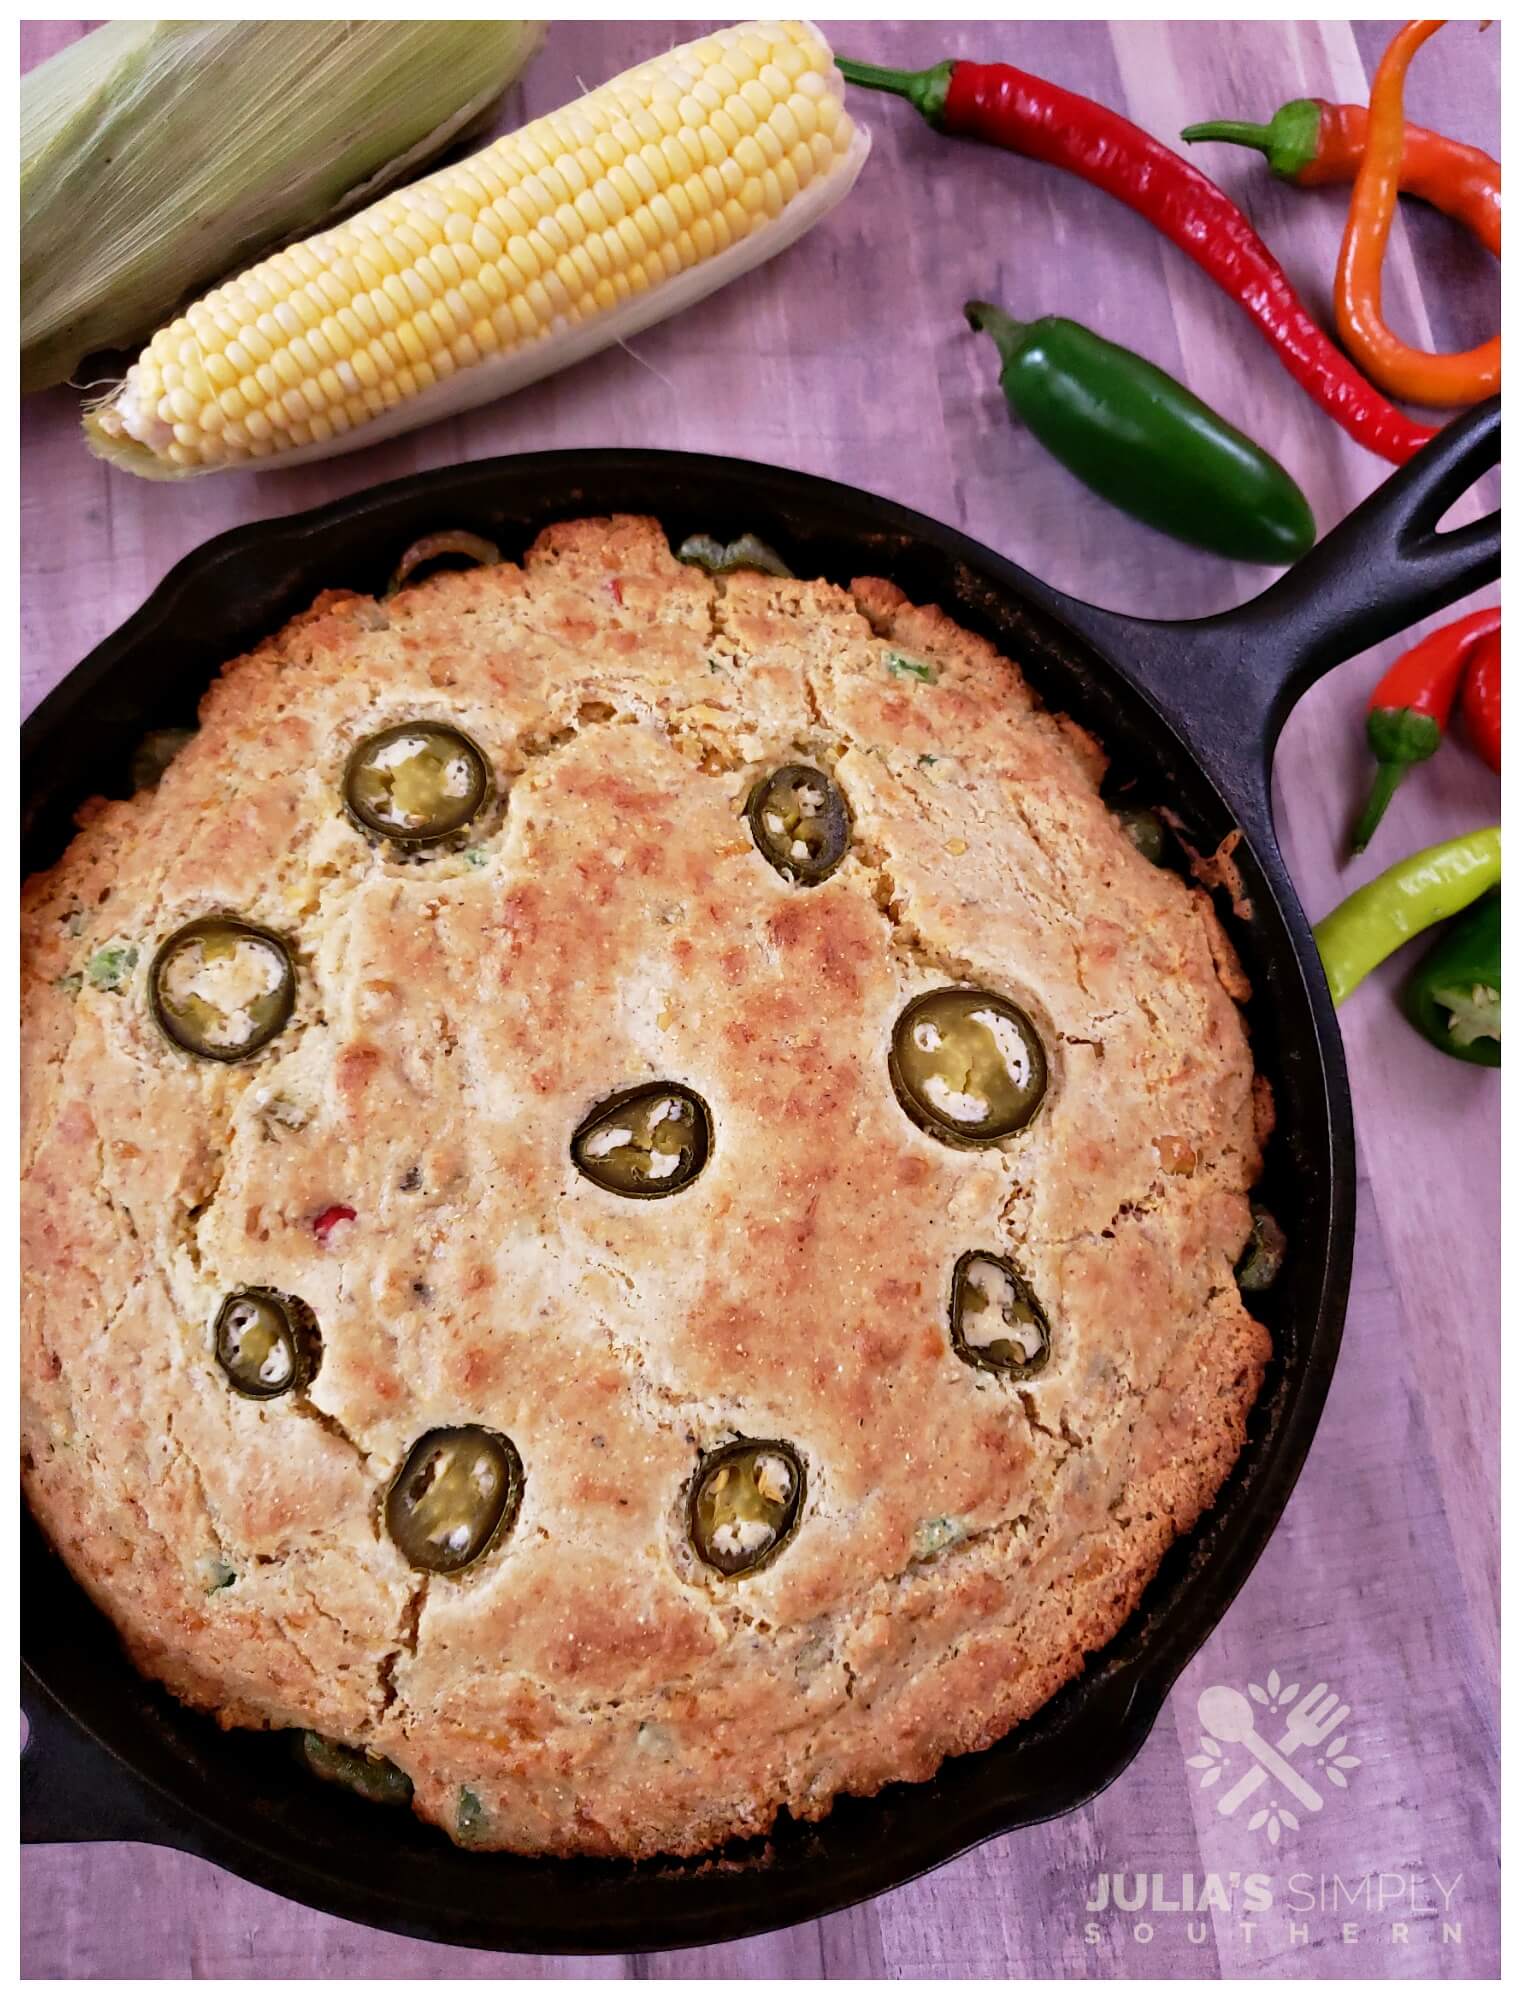 Easy Mexican Cornbread with cheese, chili peppers and cheese. A savory bread side dish made in a cast iron skillet.